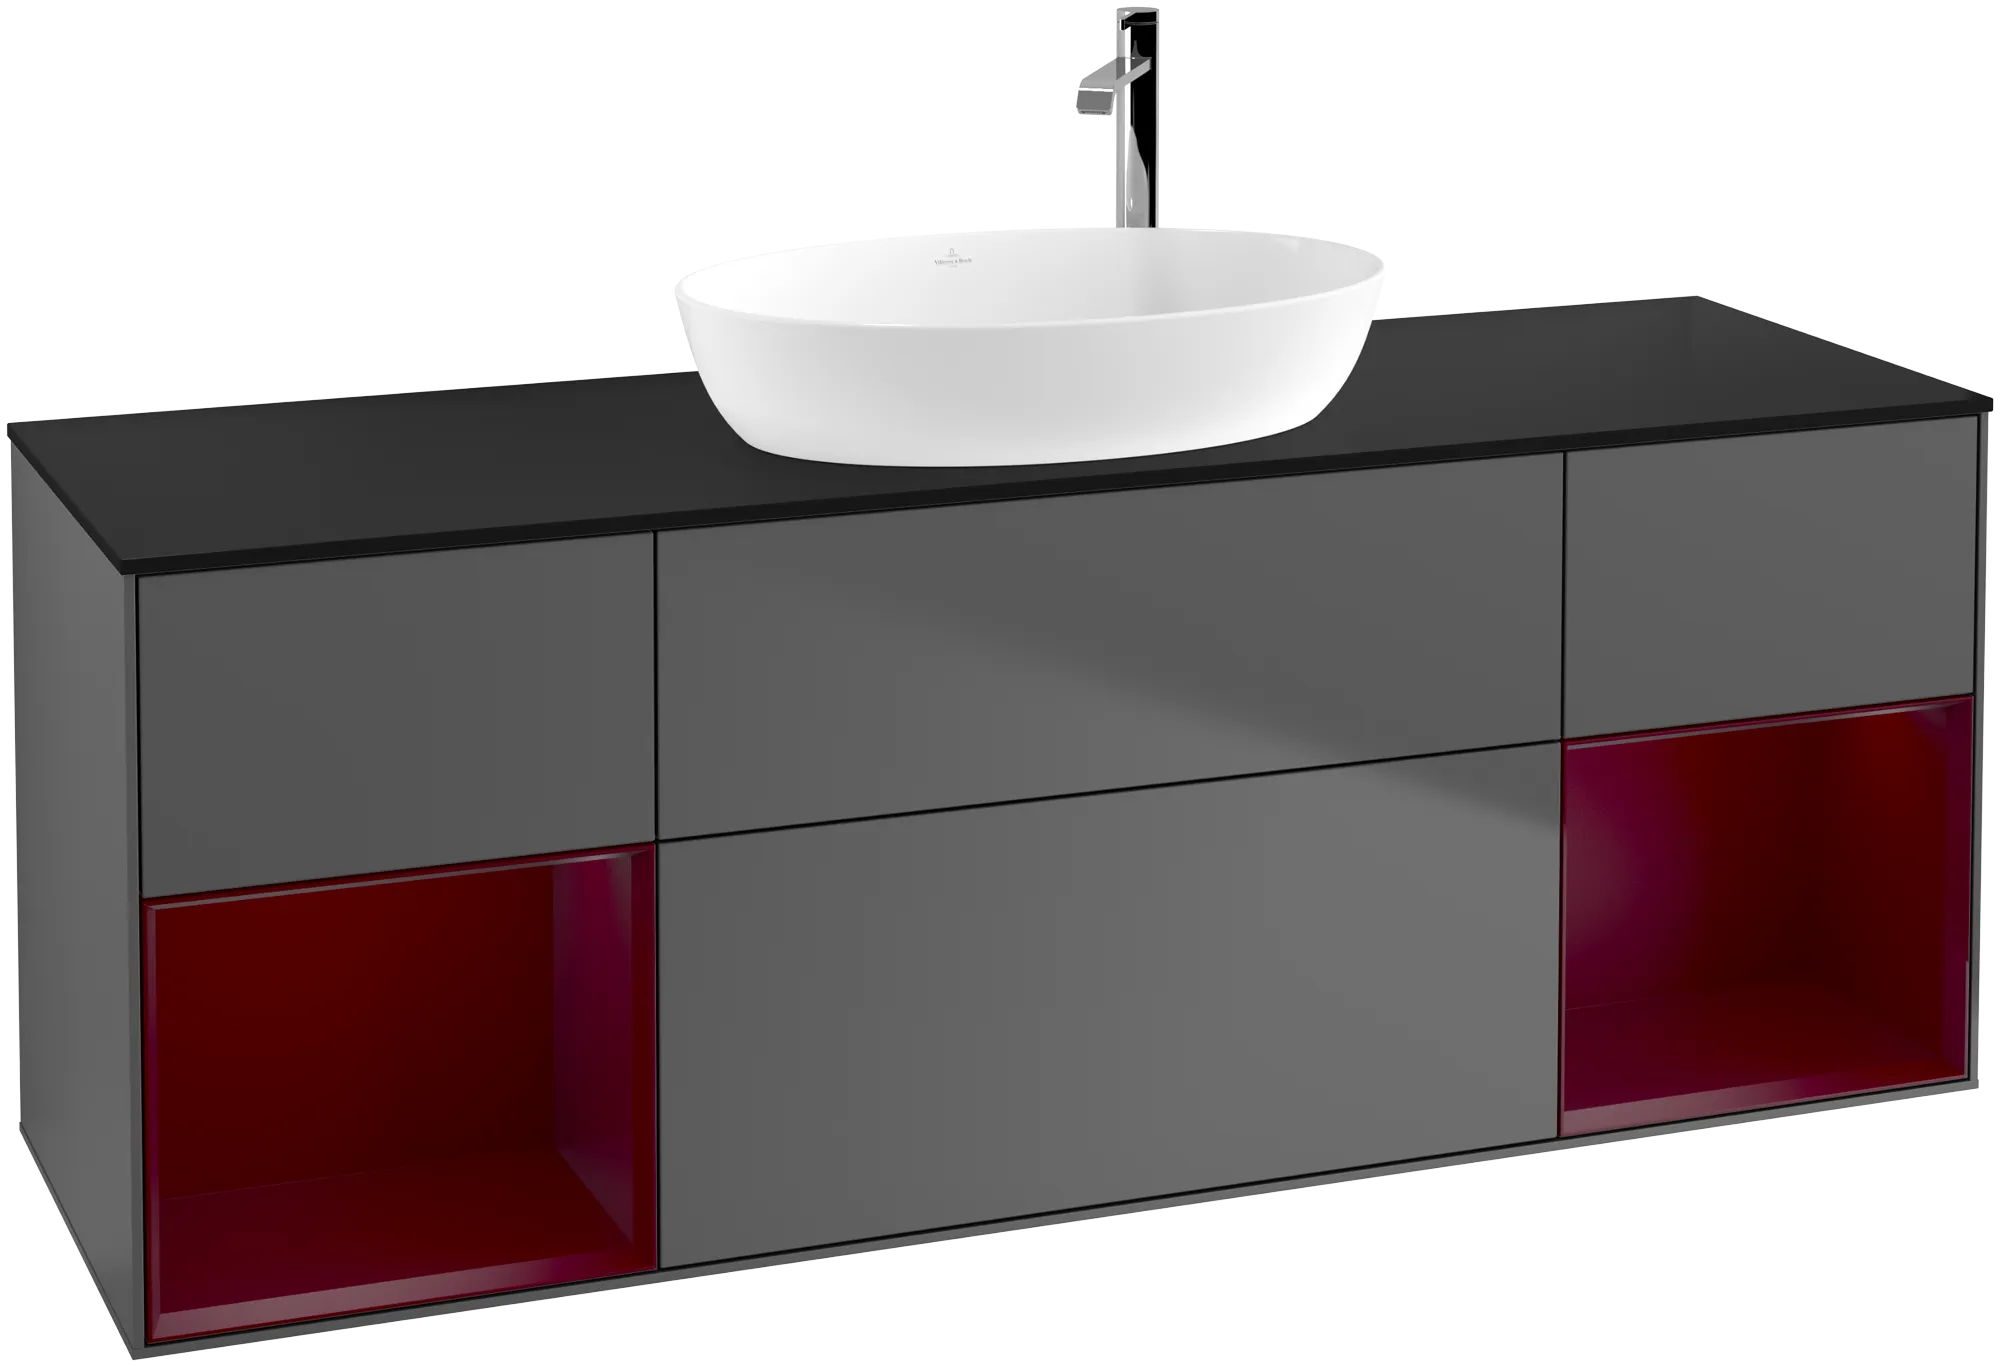 Picture of VILLEROY BOCH Finion Vanity unit, with lighting, 4 pull-out compartments, 1600 x 603 x 501 mm, Anthracite Matt Lacquer / Peony Matt Lacquer / Glass Black Matt #G982HBGK